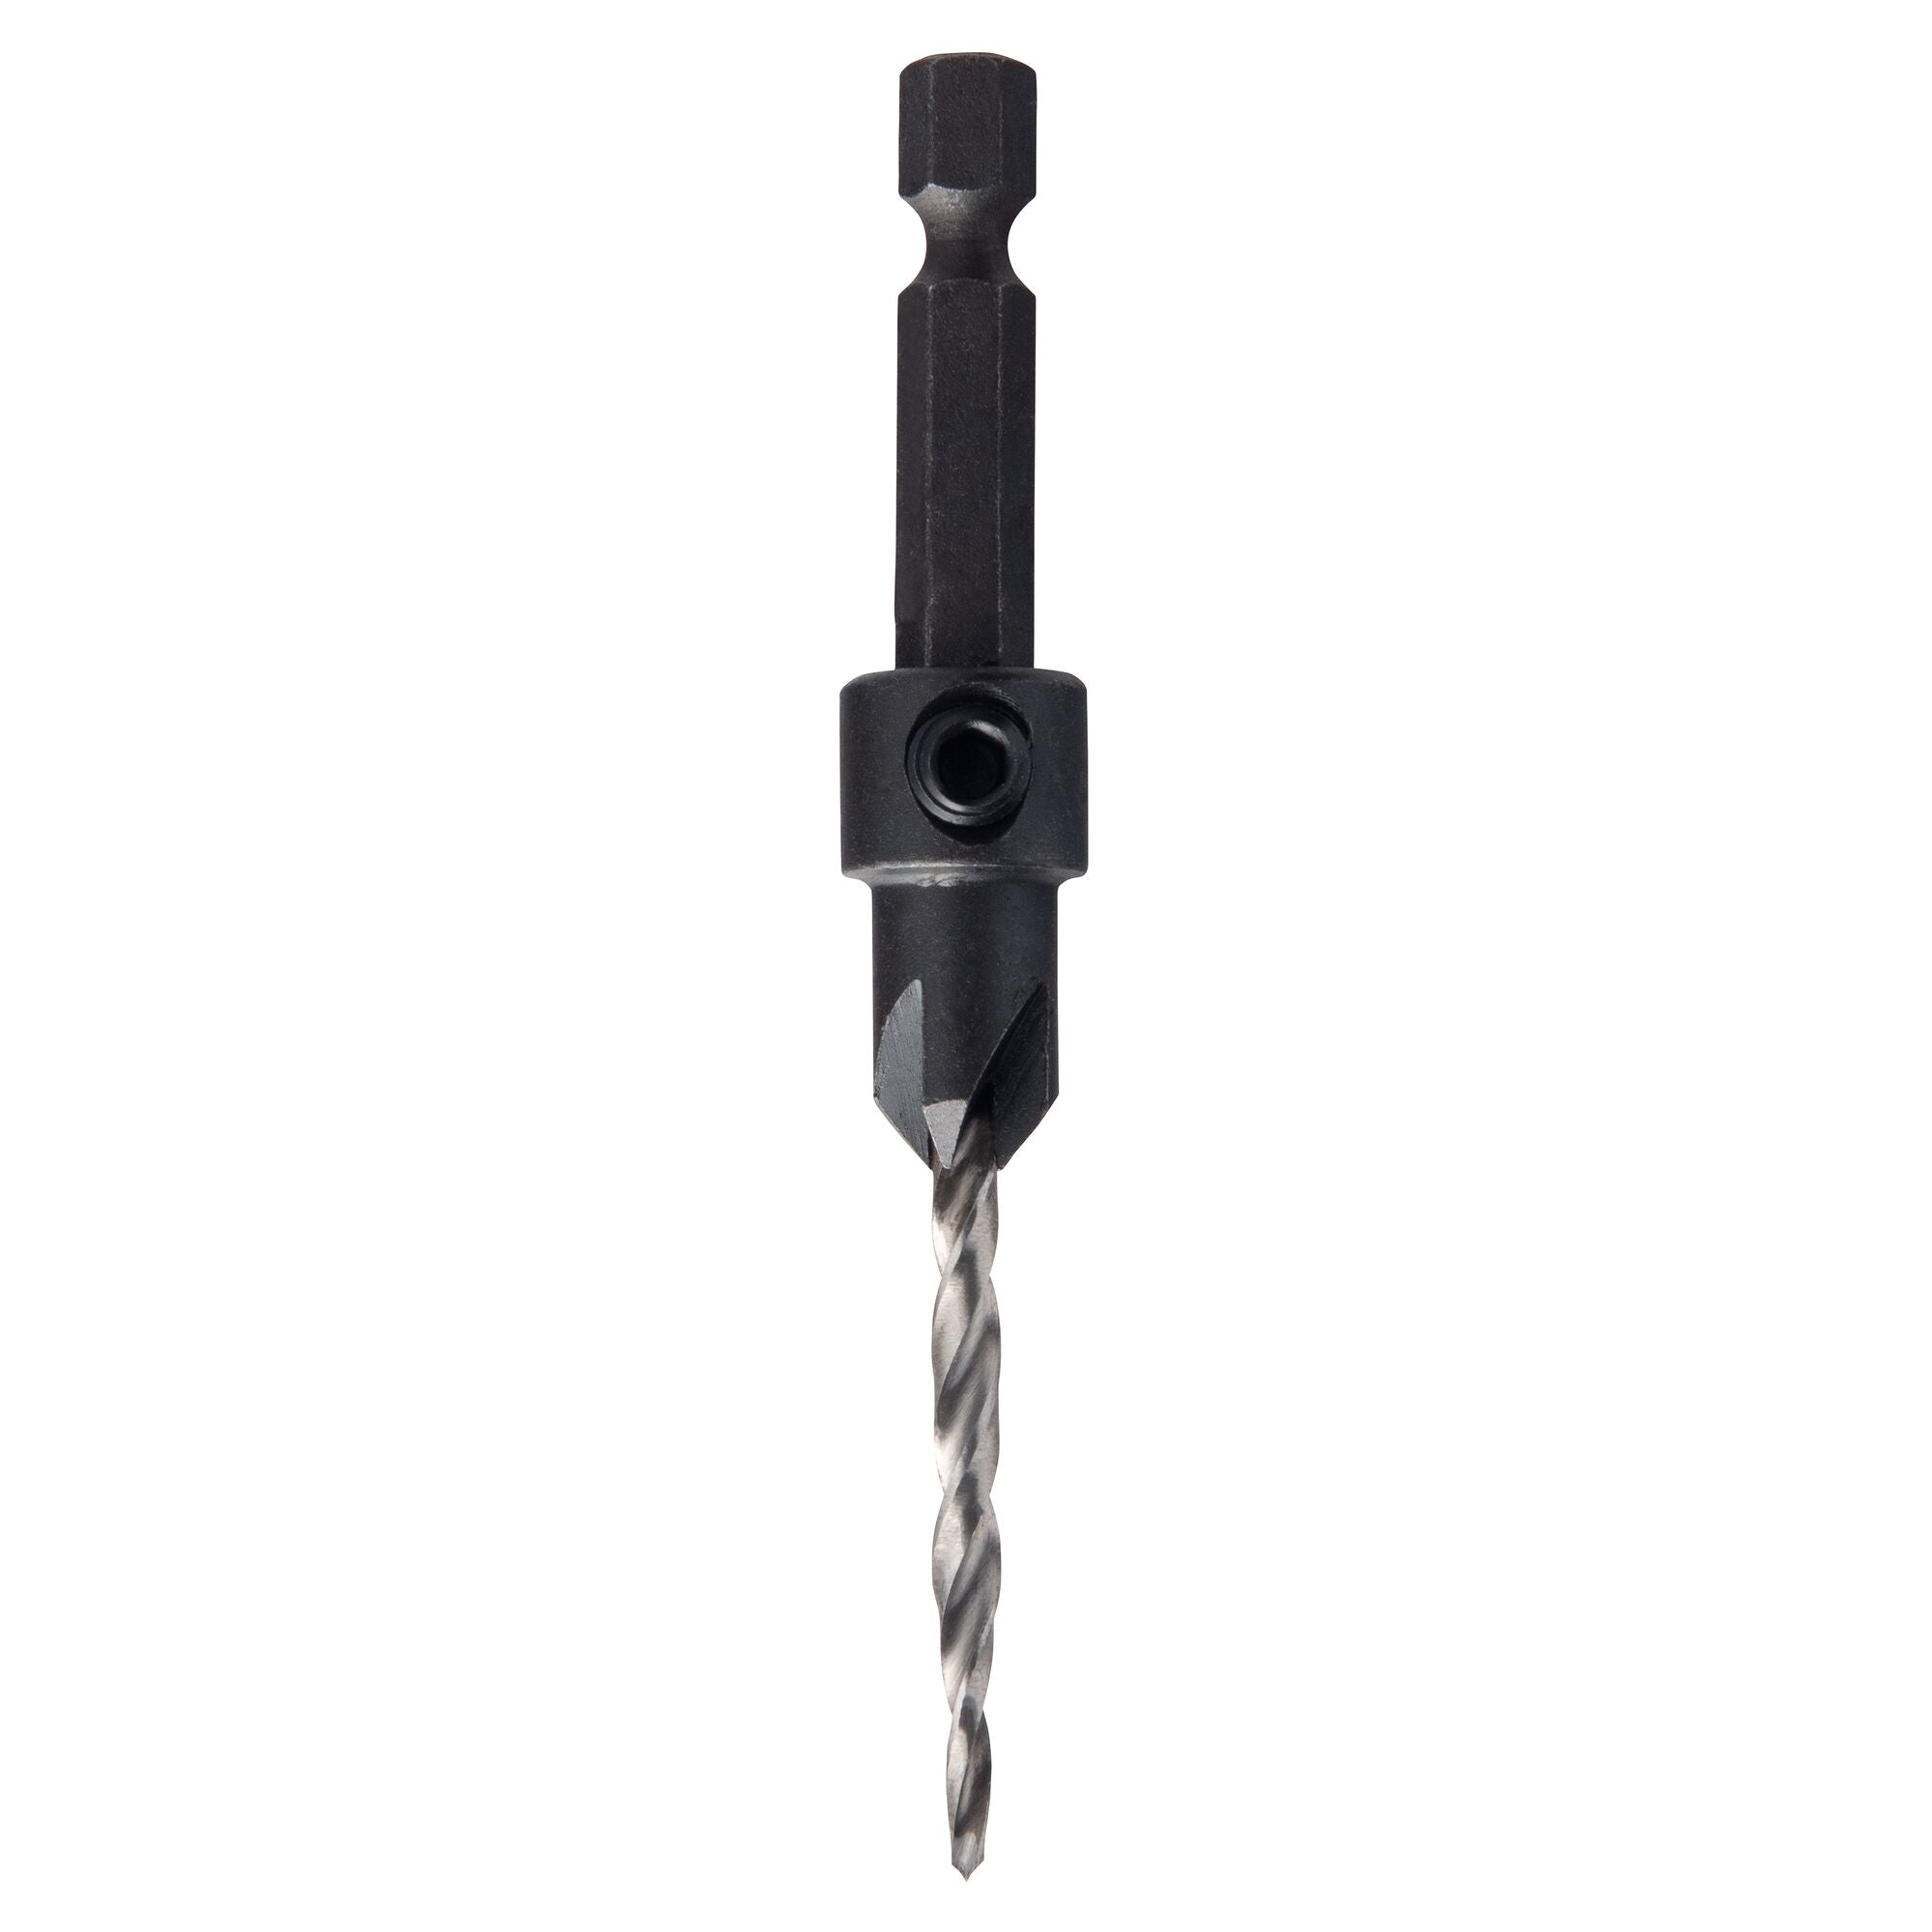 #6 Countersink with 9/64" Drill Bit